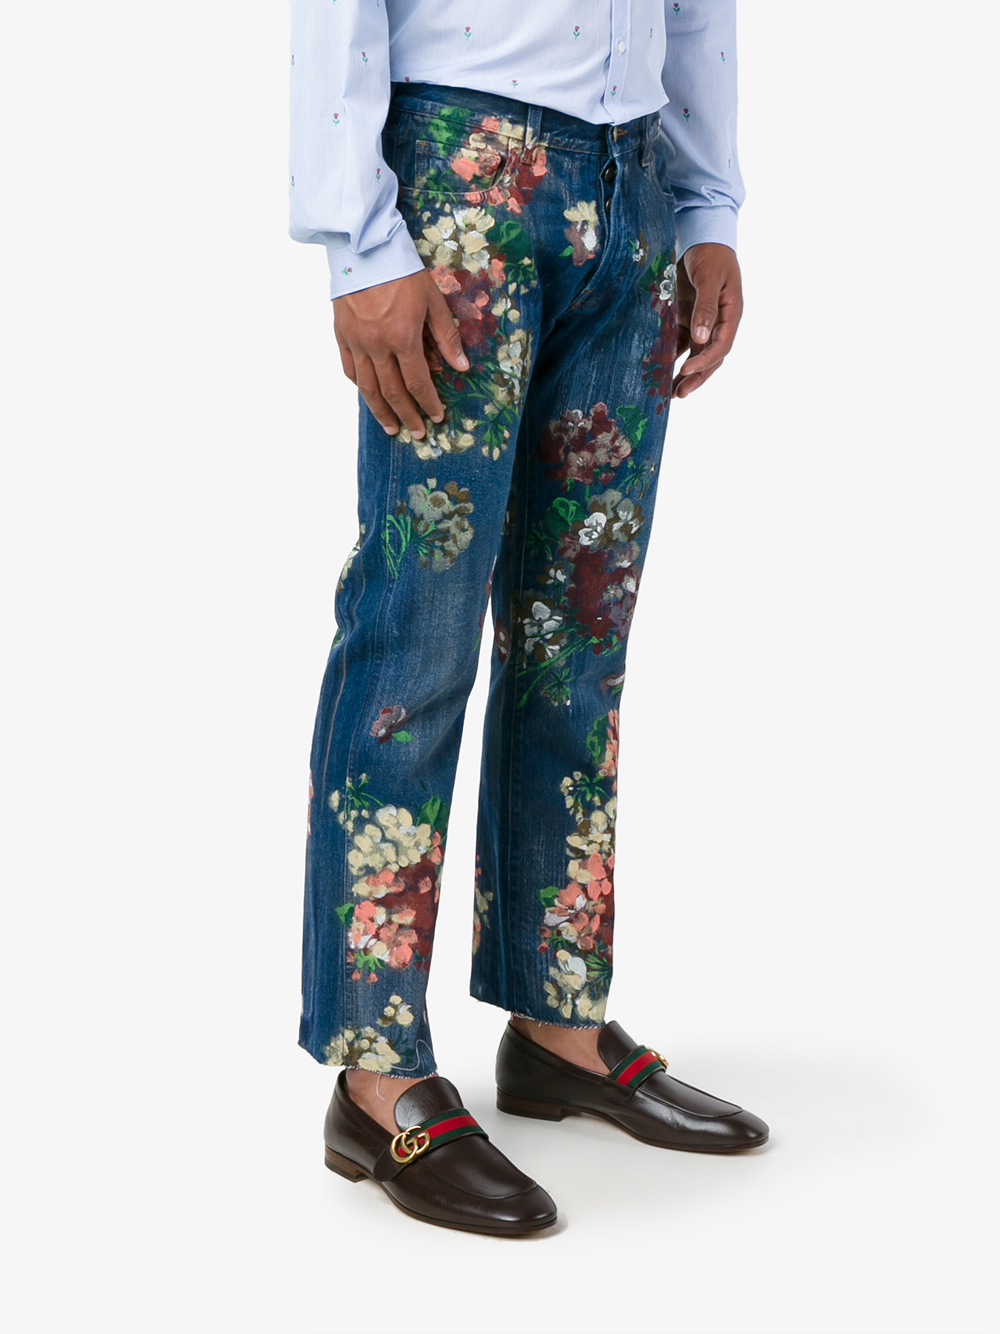 Lyst - Gucci Floral Painted Jeans in Blue for Men